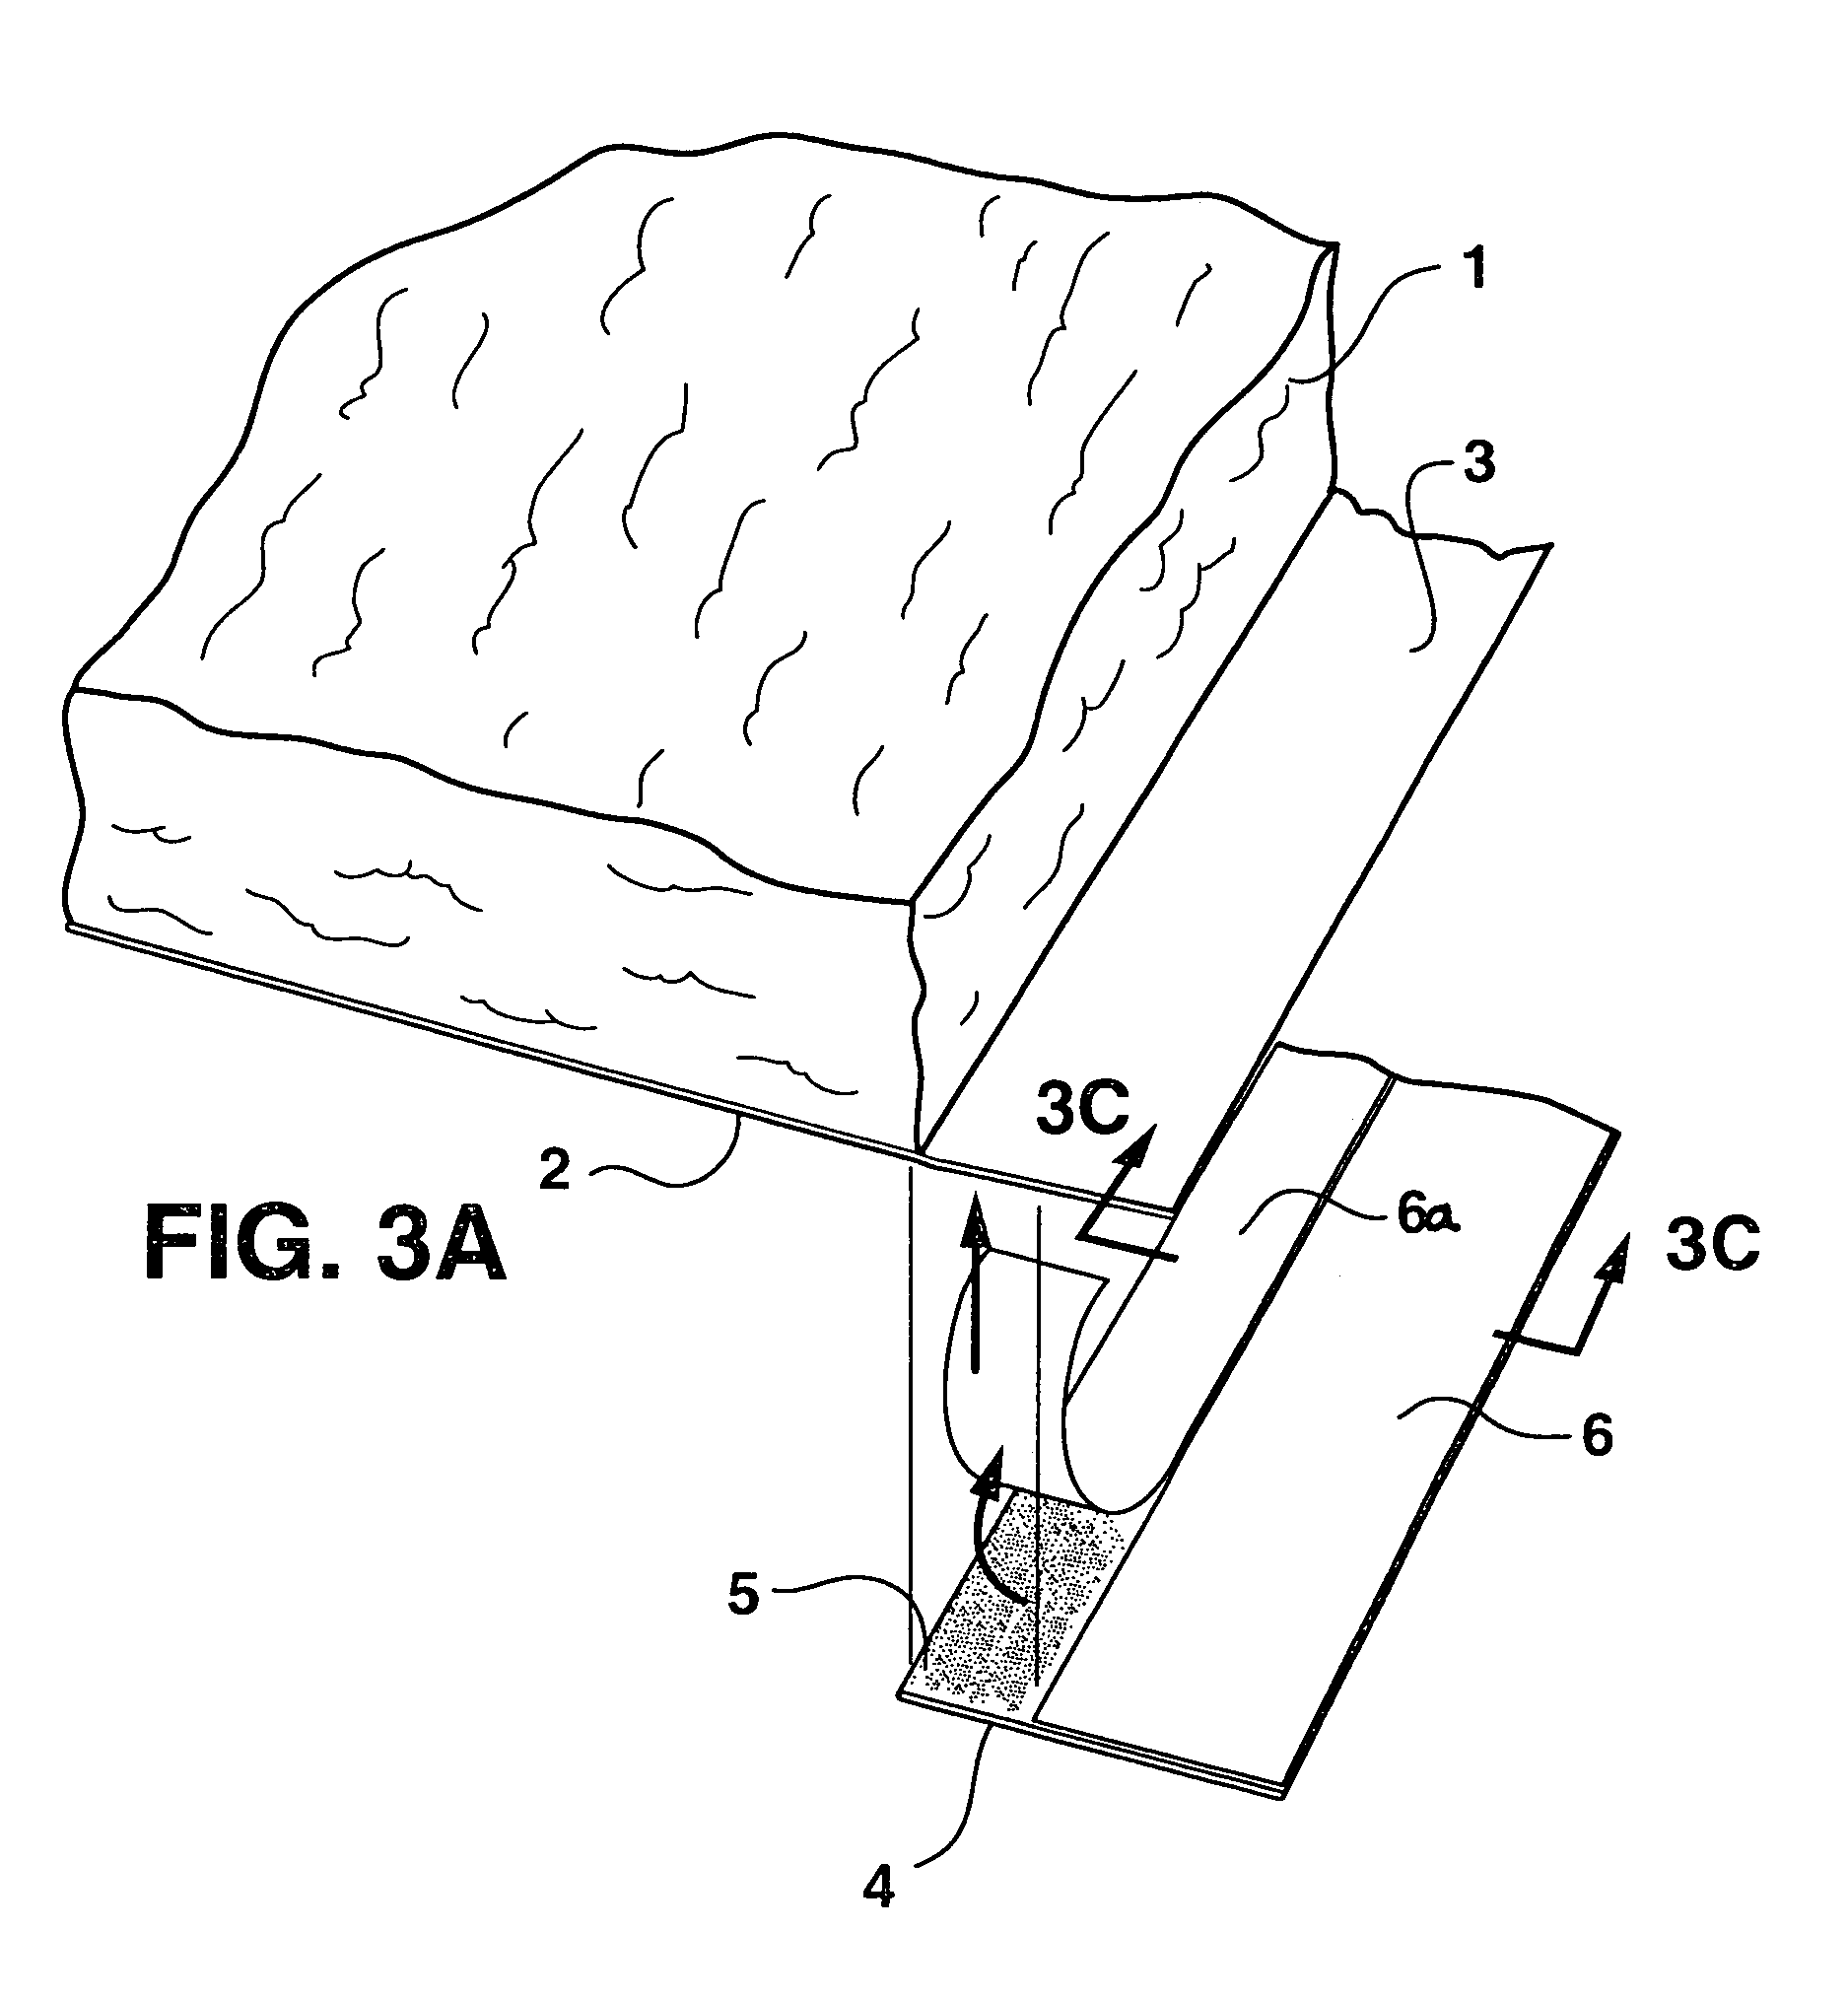 Prefabricated insulation for HVAC ductwork and other fluid conduits